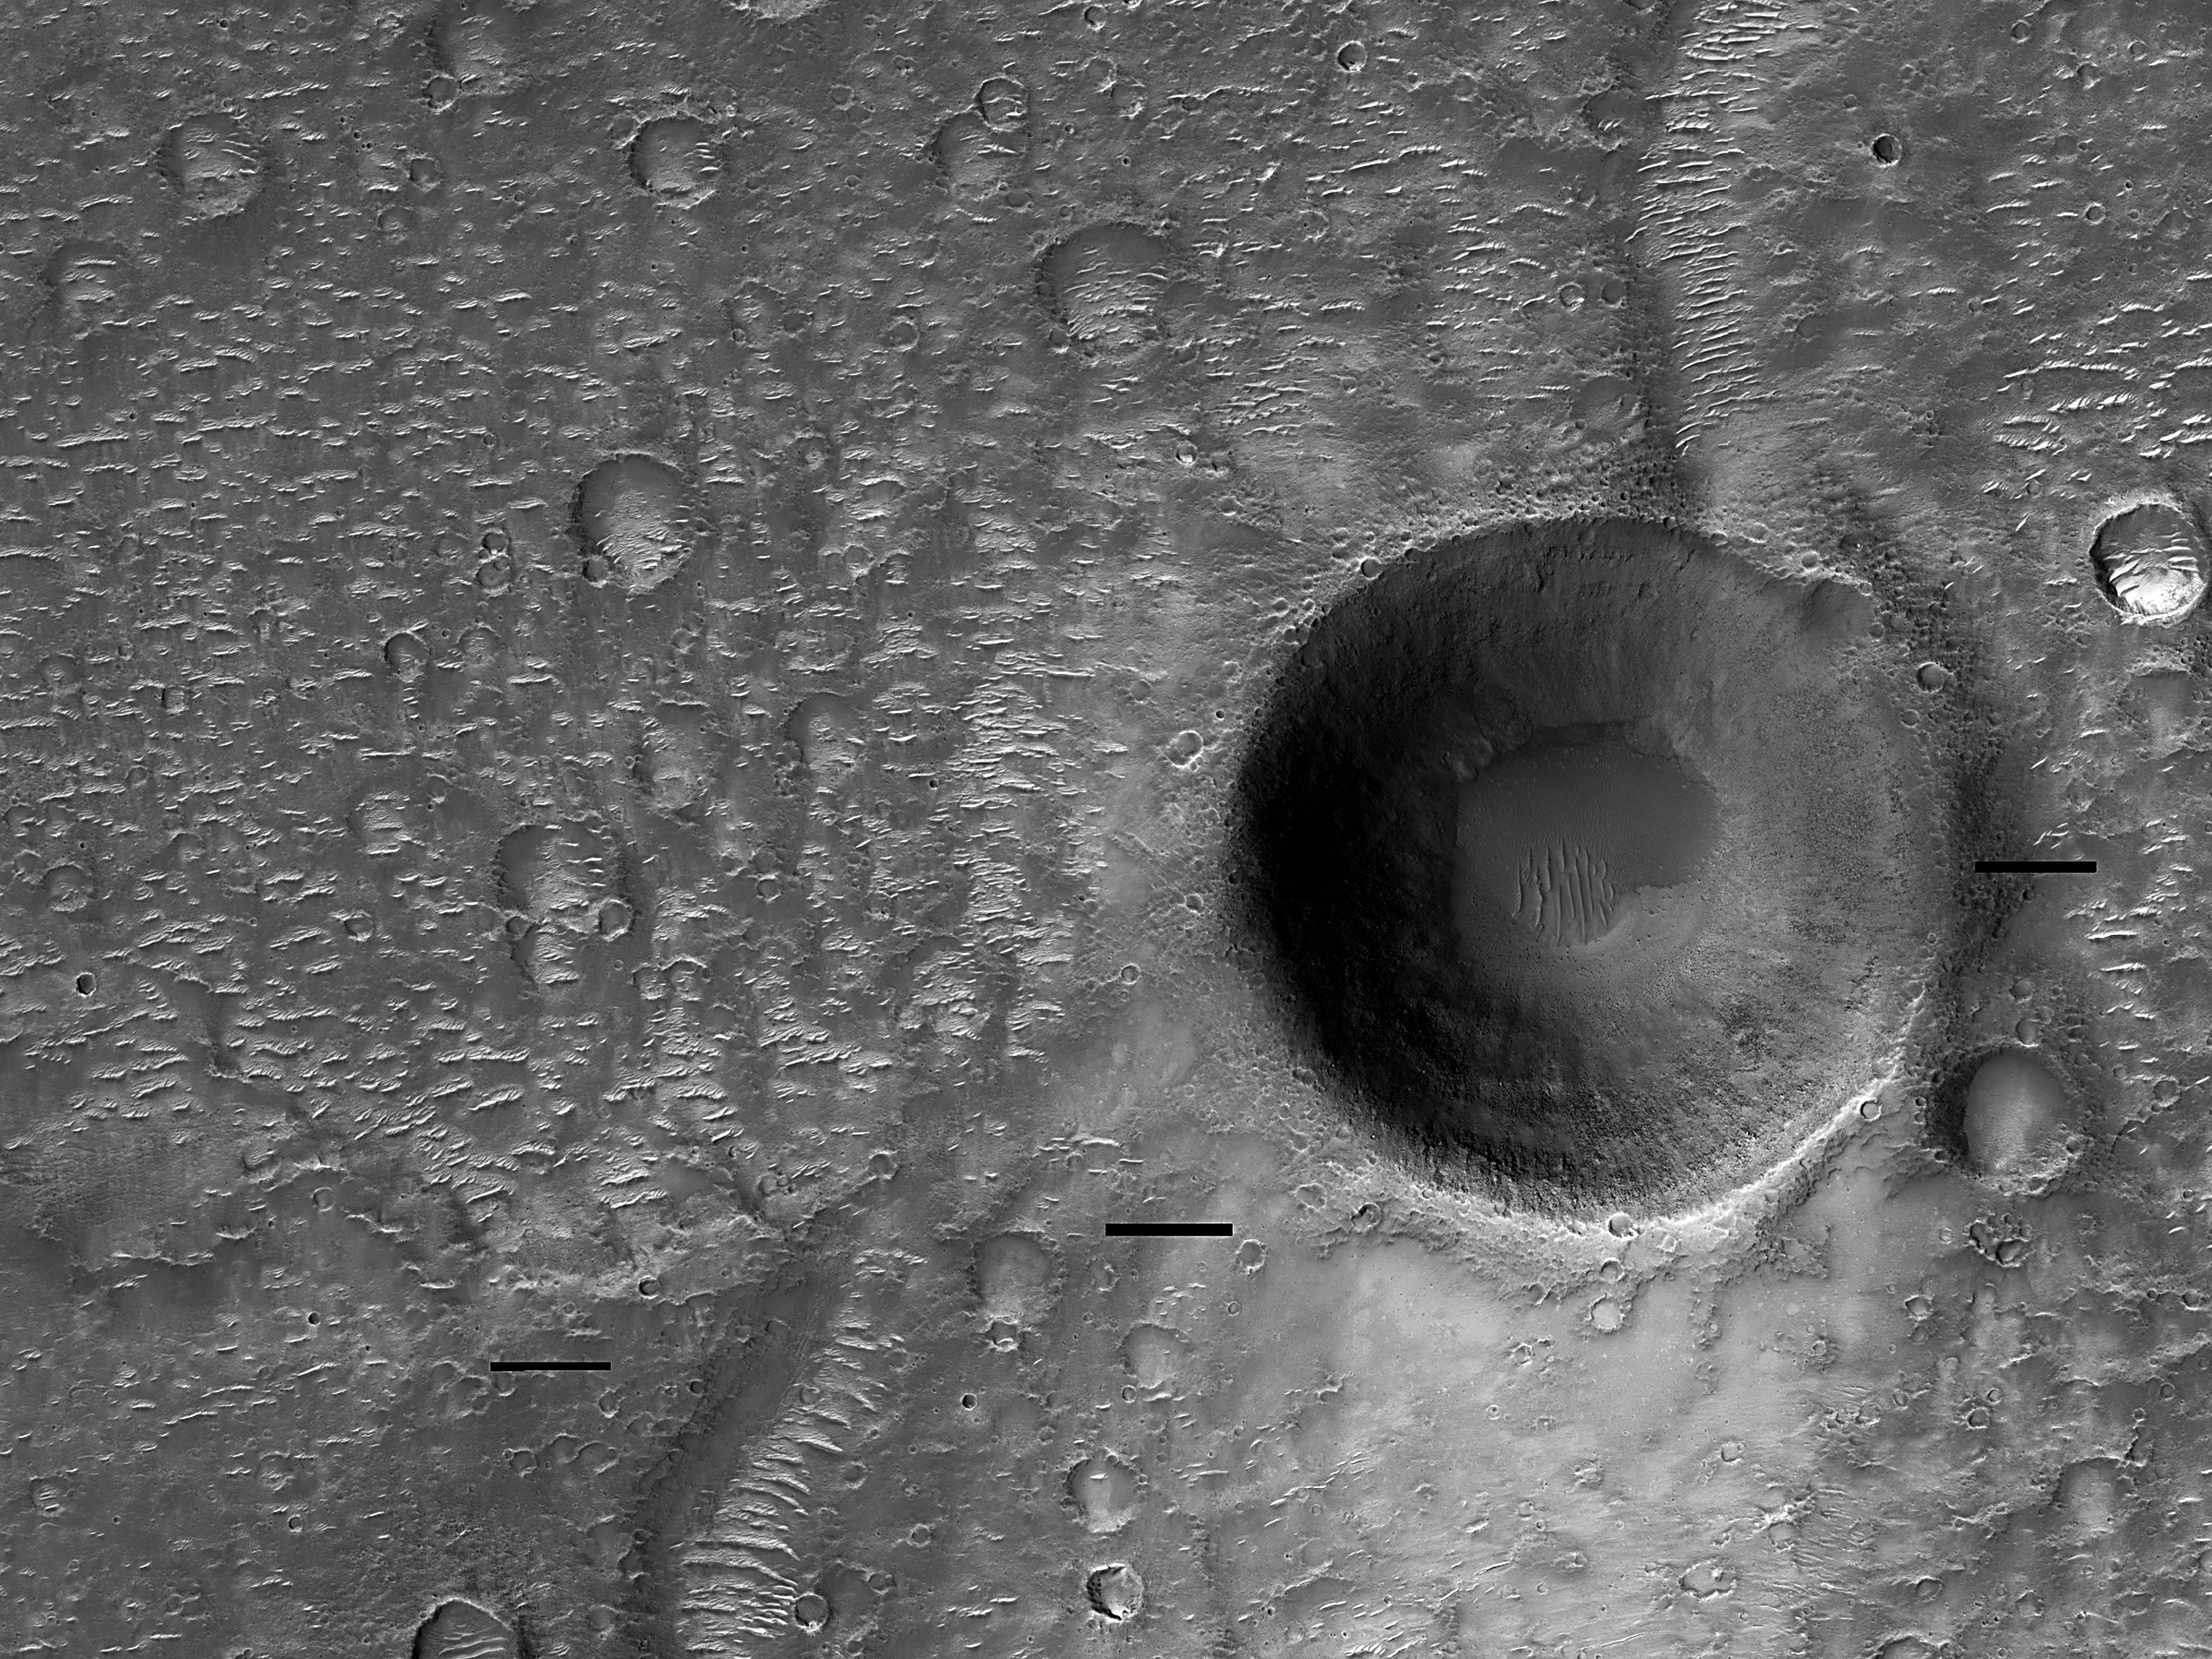 A Channel and Crater in Hesperia Planum